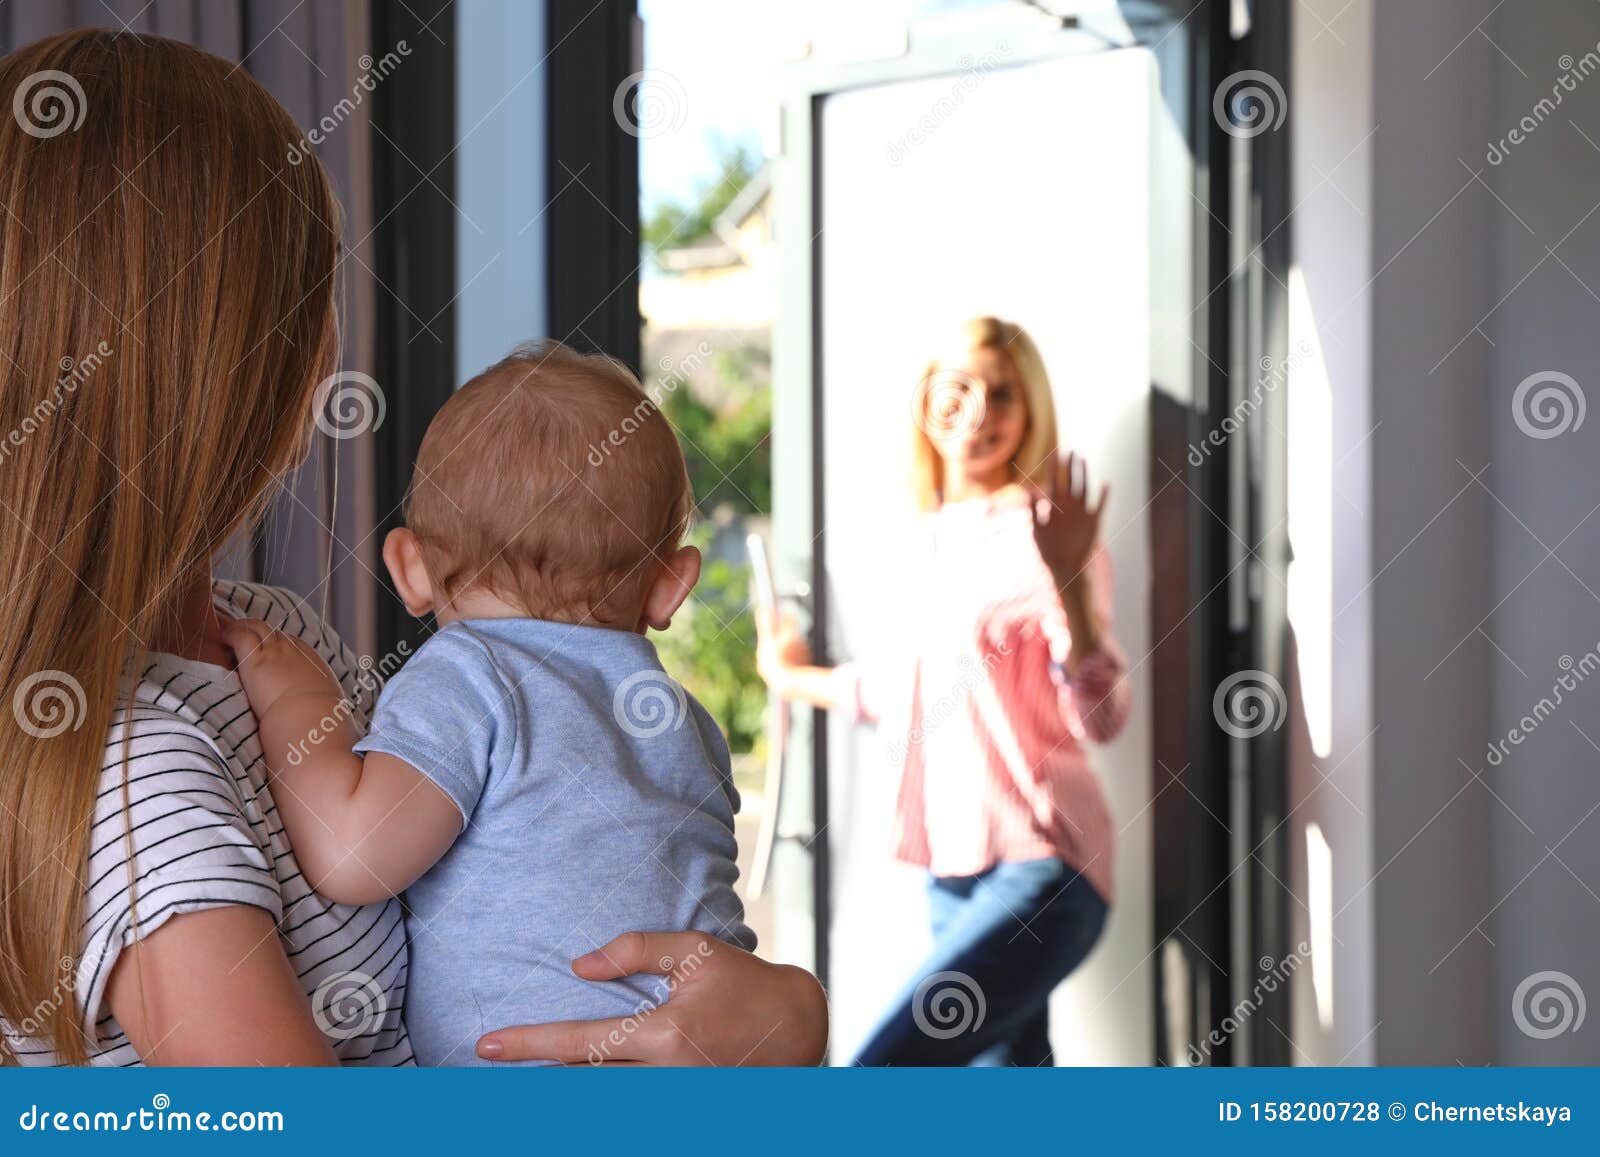 mother leaving her baby with teen nanny